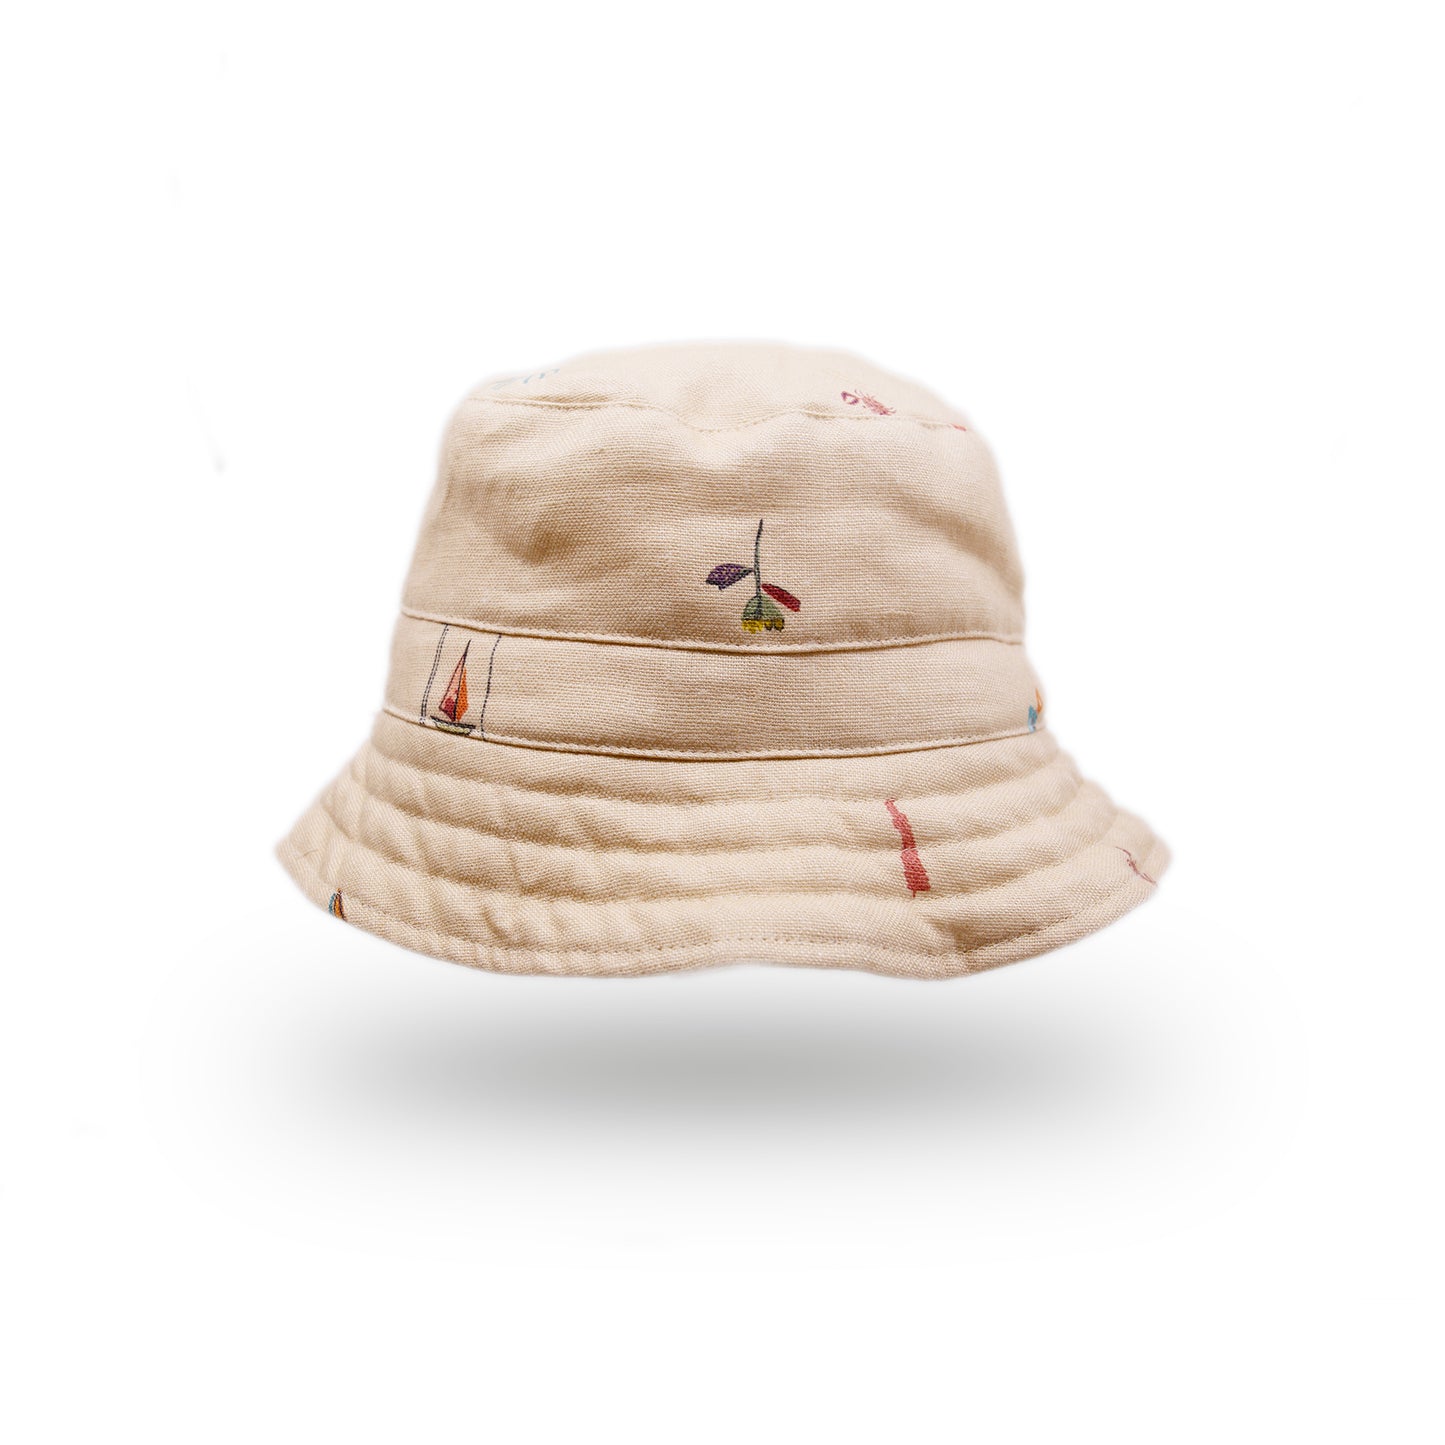 100% linen bucket hat in cream  Cream printed linen   Printed NF beach icons throughout  Made in LA